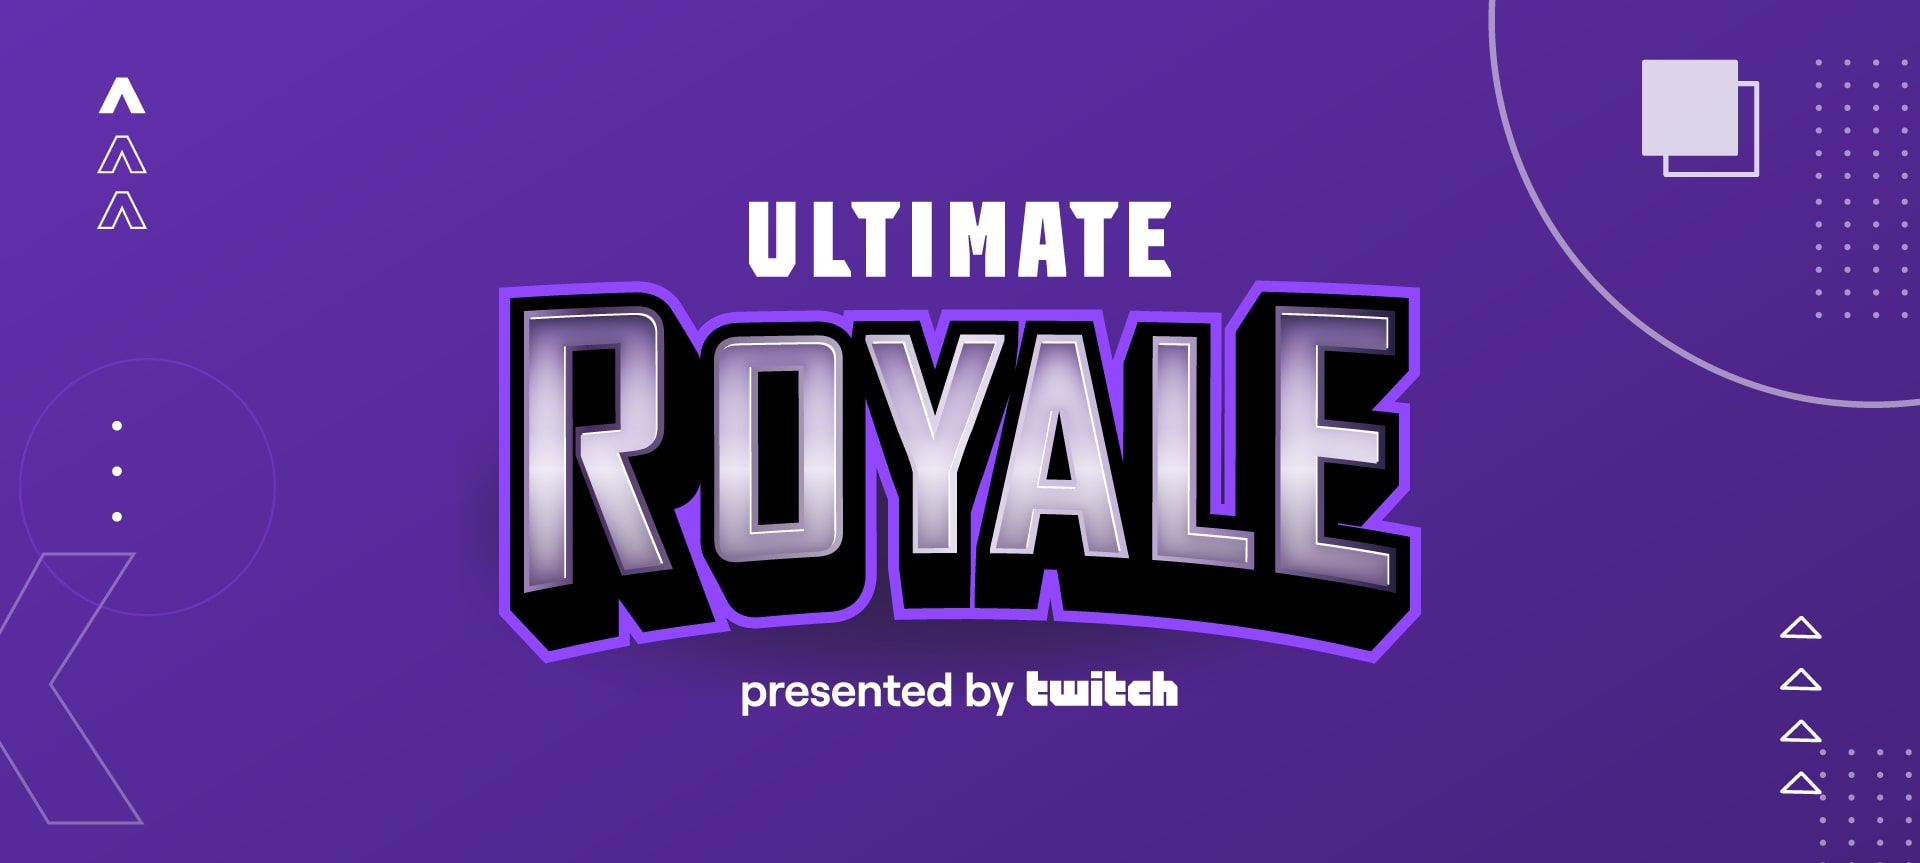 Twitch Ultimate Royale